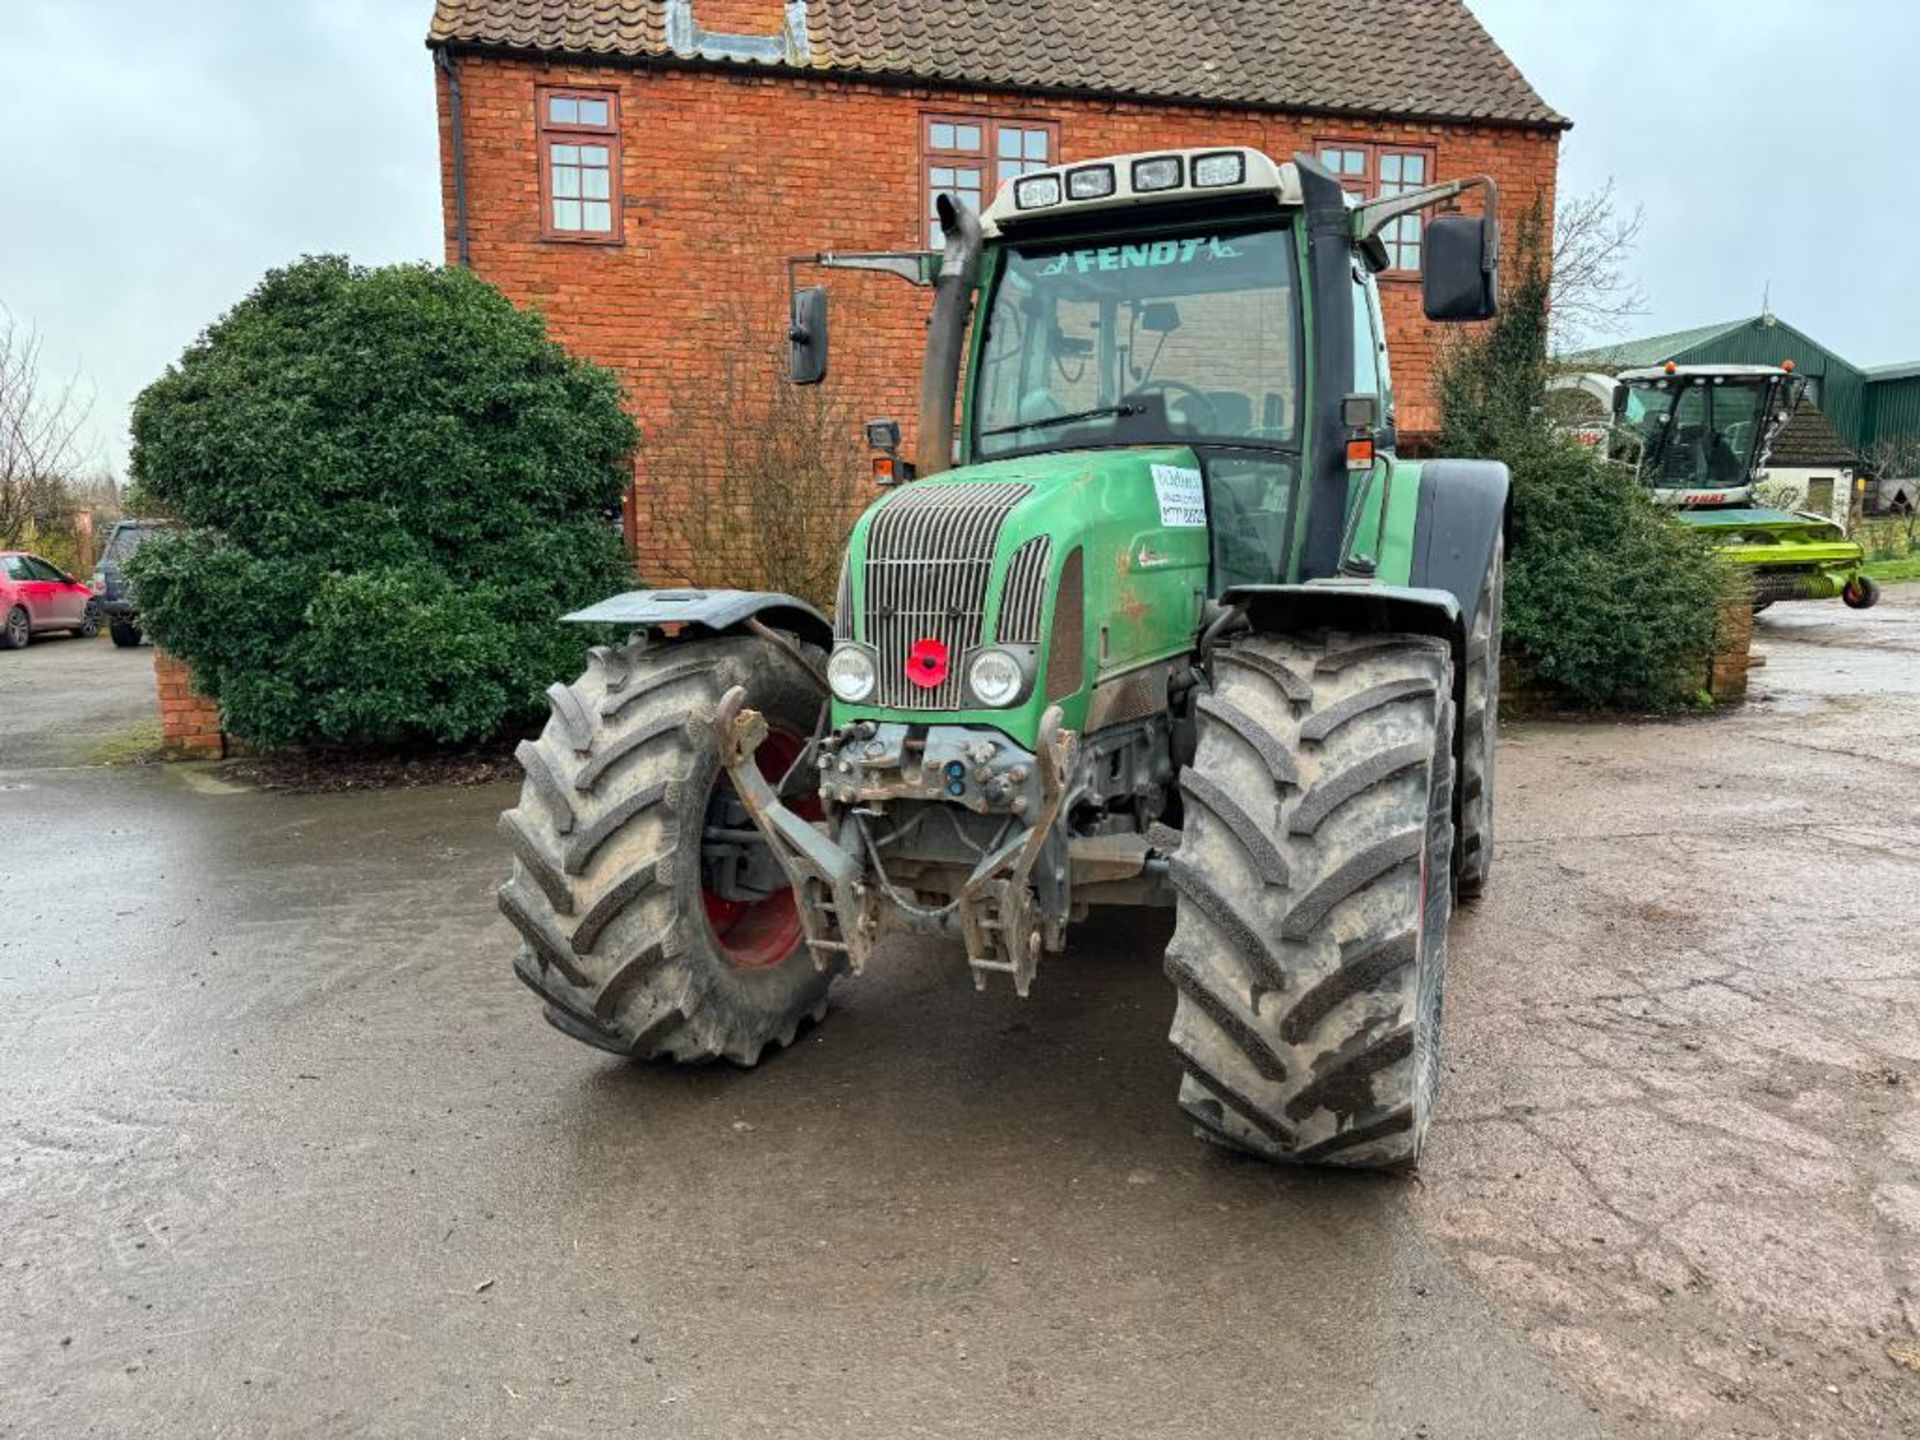 2001 Fendt 716 Vario 50kph 4wd tractor with 4 electric spools, air brakes and front linkage on BKT 5 - Image 4 of 22